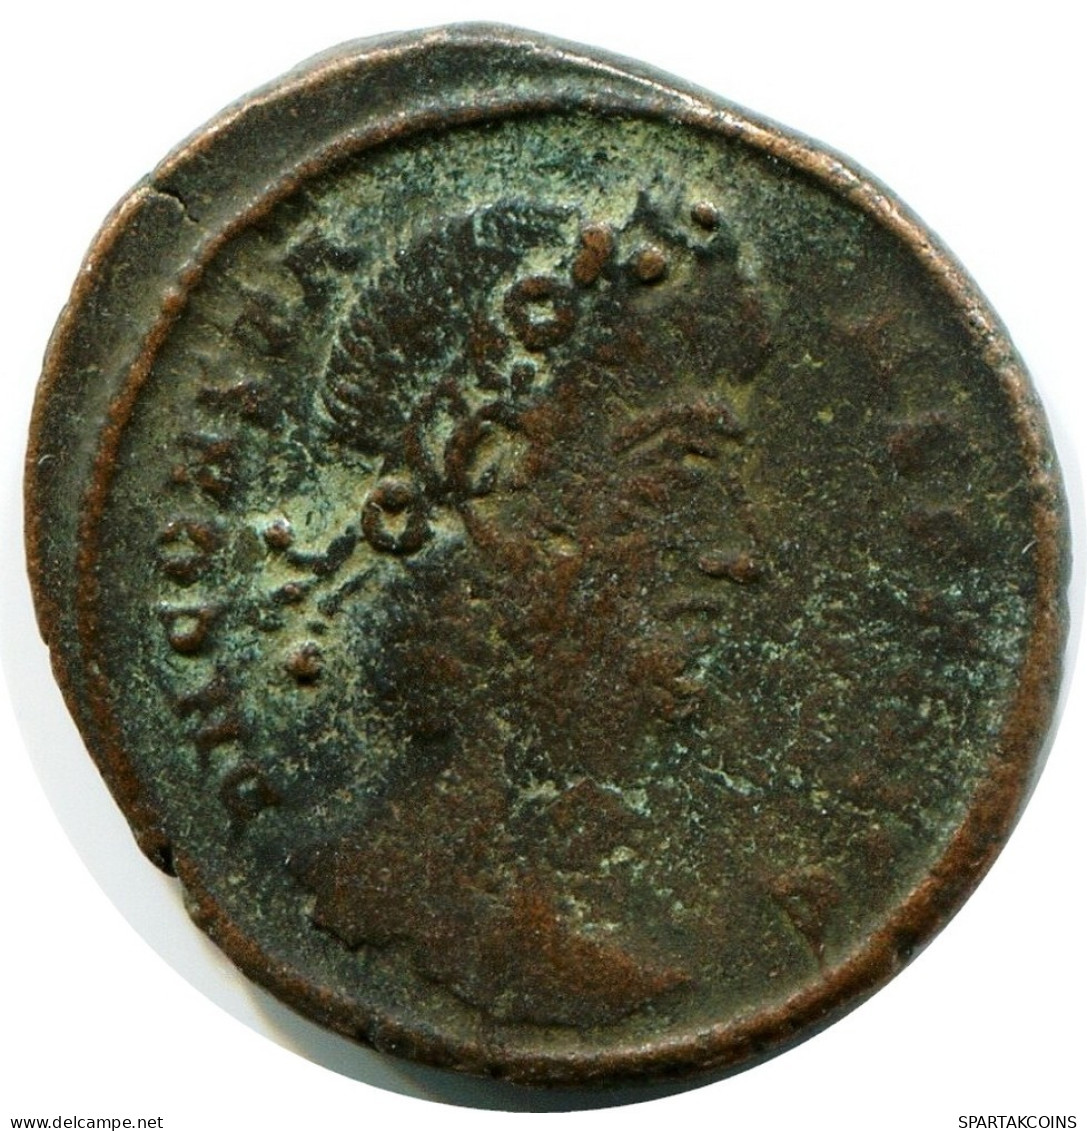 CONSTANS MINTED IN NICOMEDIA FROM THE ROYAL ONTARIO MUSEUM #ANC11721.14.E.A - L'Empire Chrétien (307 à 363)